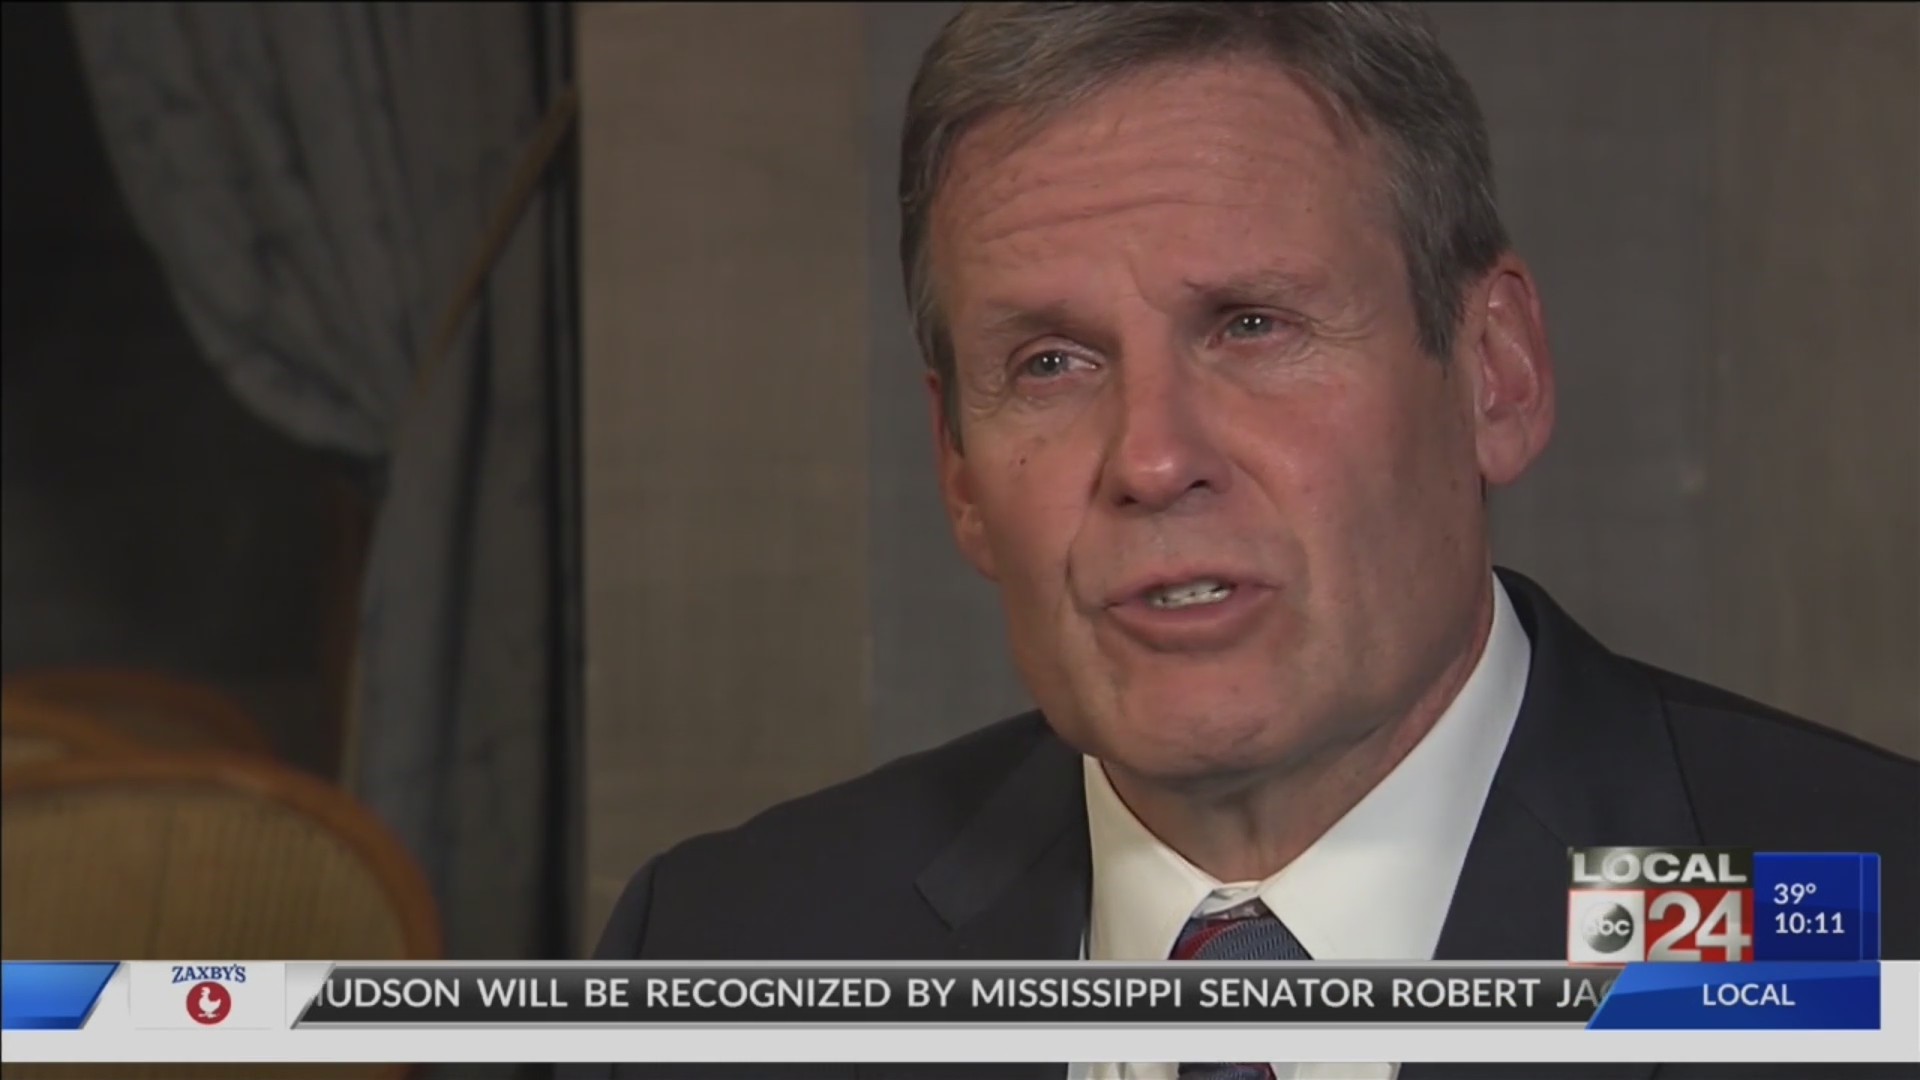 In an exclusive interview, Tennessee Gov. Bill Lee discusses a wide range of topics with Local 24 News anchor Richard Ransom